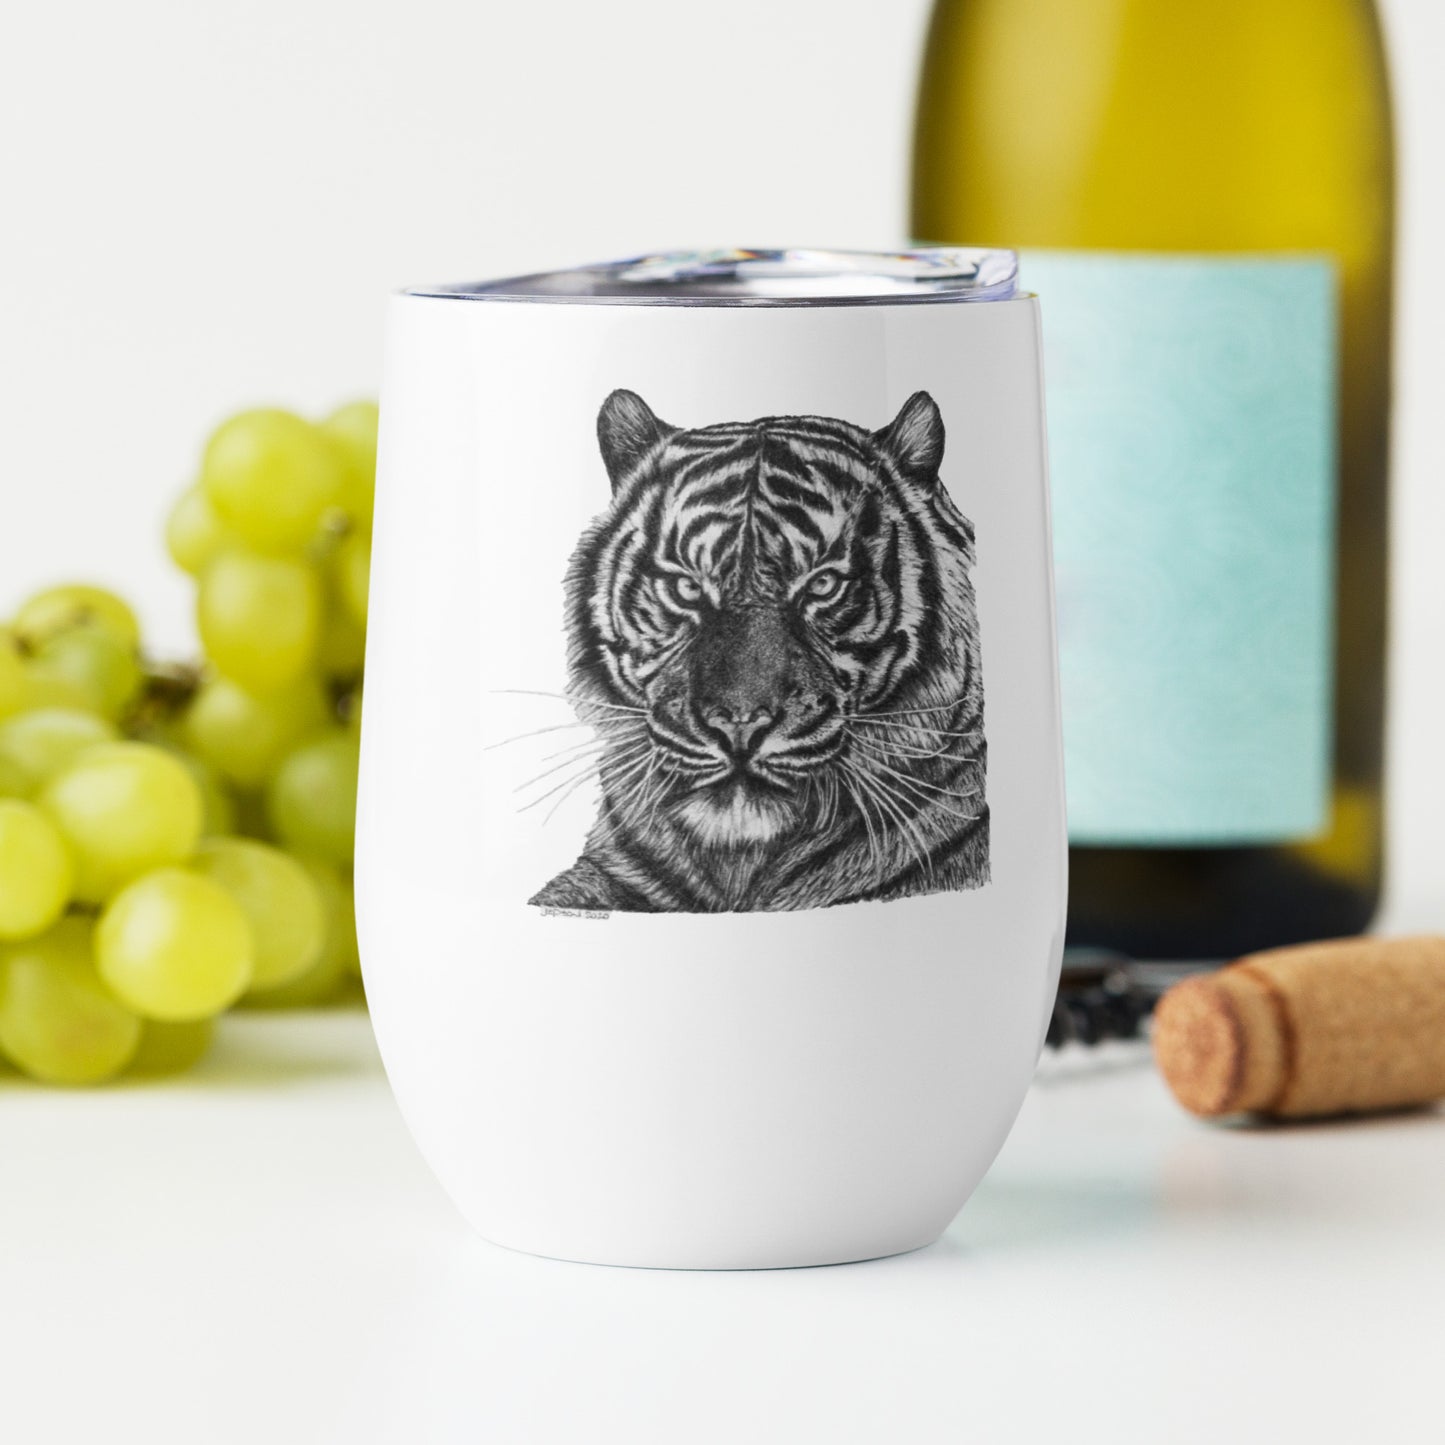 This "Tiger Wine Tumbler (W)" is from a drawing of mine created with a graphite pencil. It has been digitally optimized and transferred to a 12oz White Wine Tumbler.